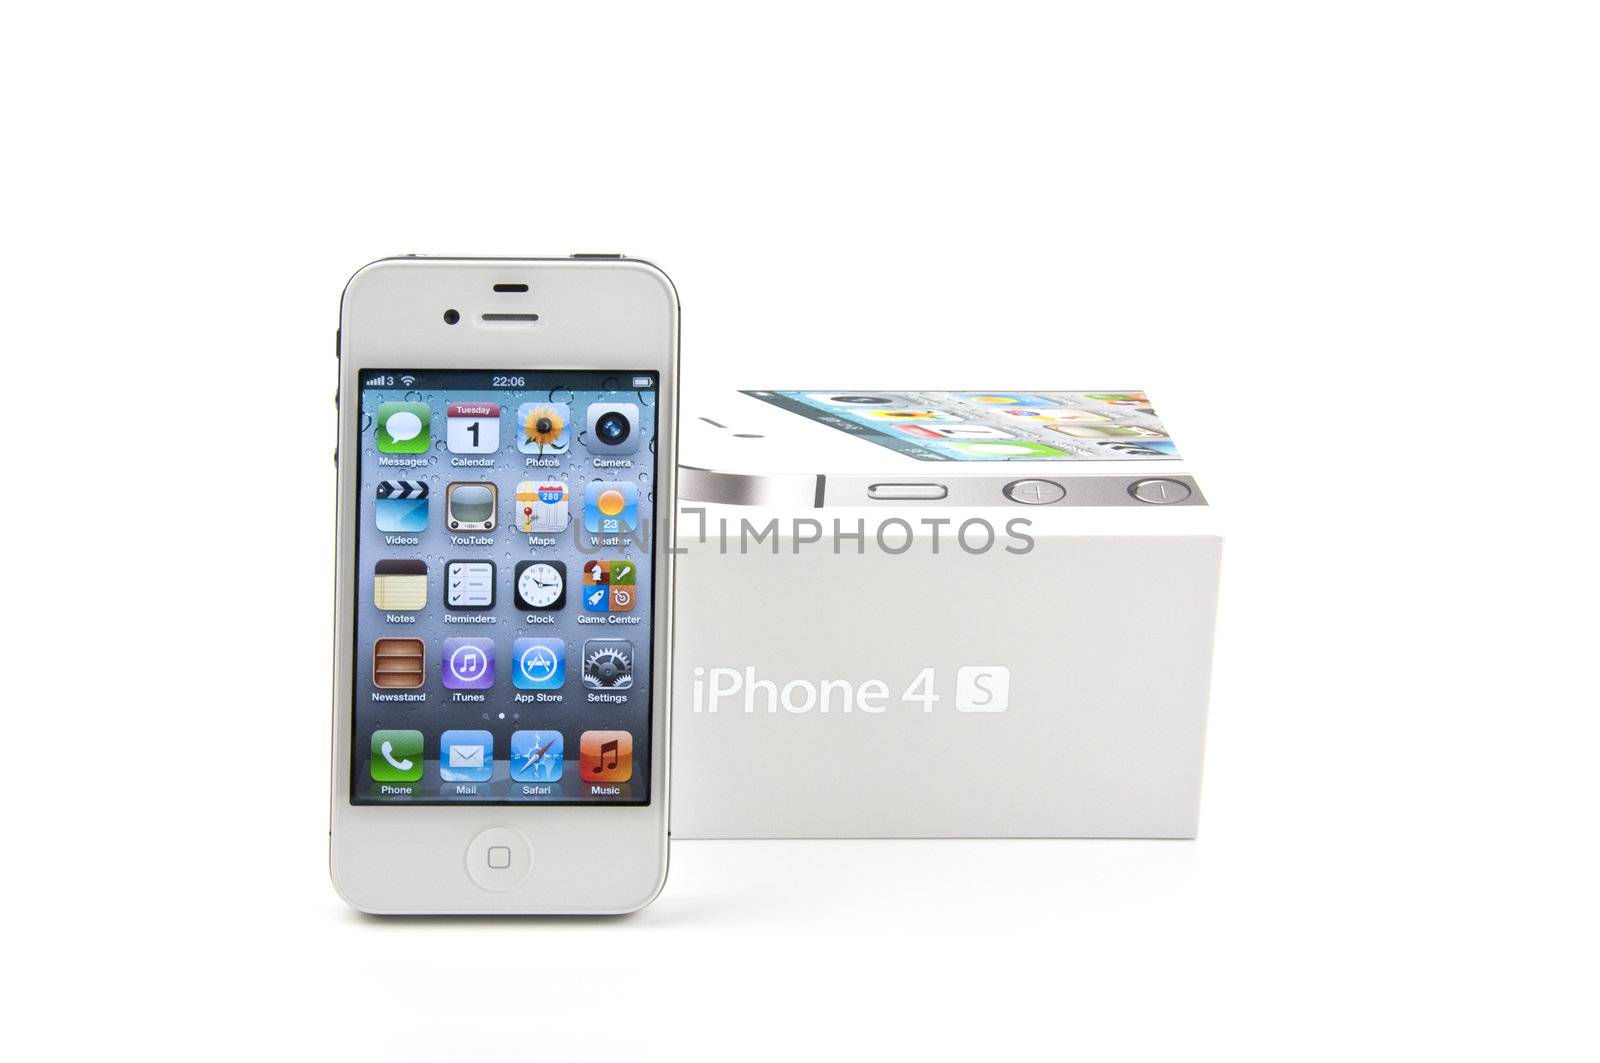 White iPhone 4S and its box by dutourdumonde